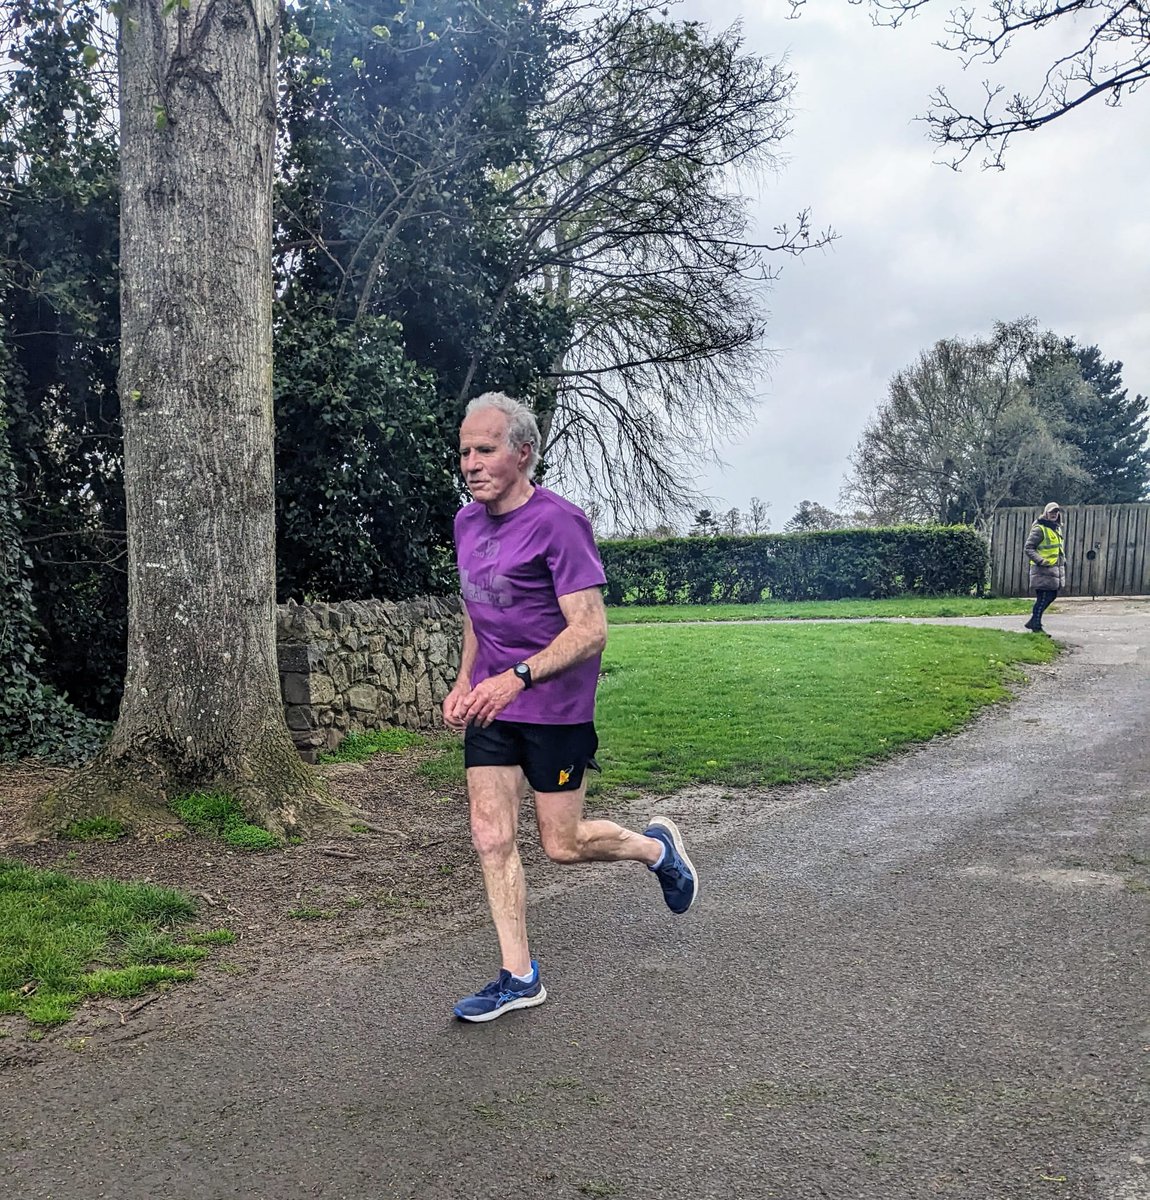 Steven Rowe has completed 450 parkruns and is one of just two people to complete all 40 of the Raheny 5-mile races. Despite his age, he volunteers regularly as a pacer and is always one of the community’s best advocates for parkrun. 
Ruth Brady, Malahide parkrun
🌳 #loveparkrun